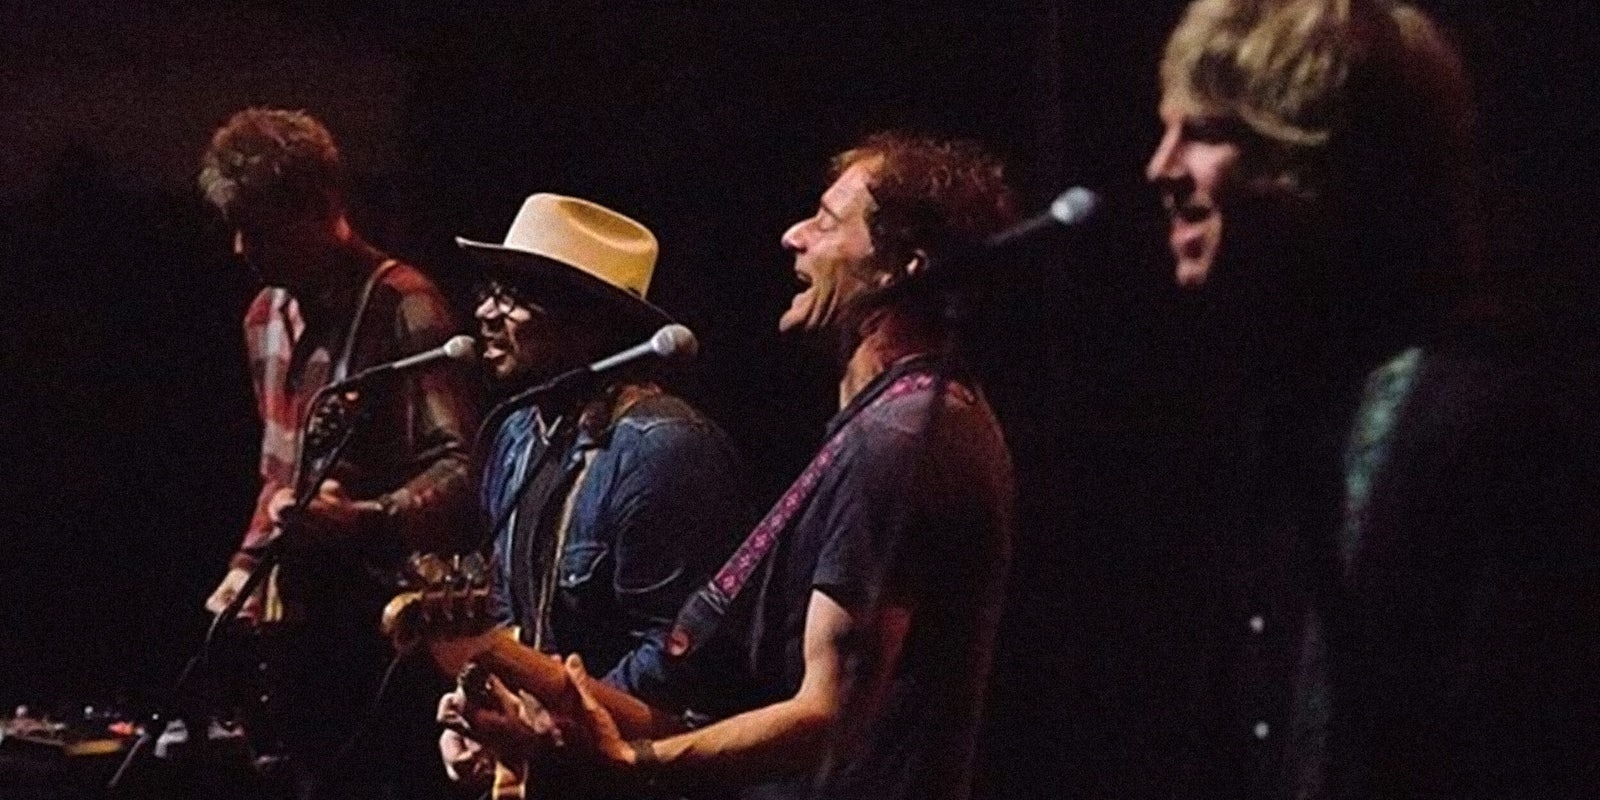 Wilco performing on stage